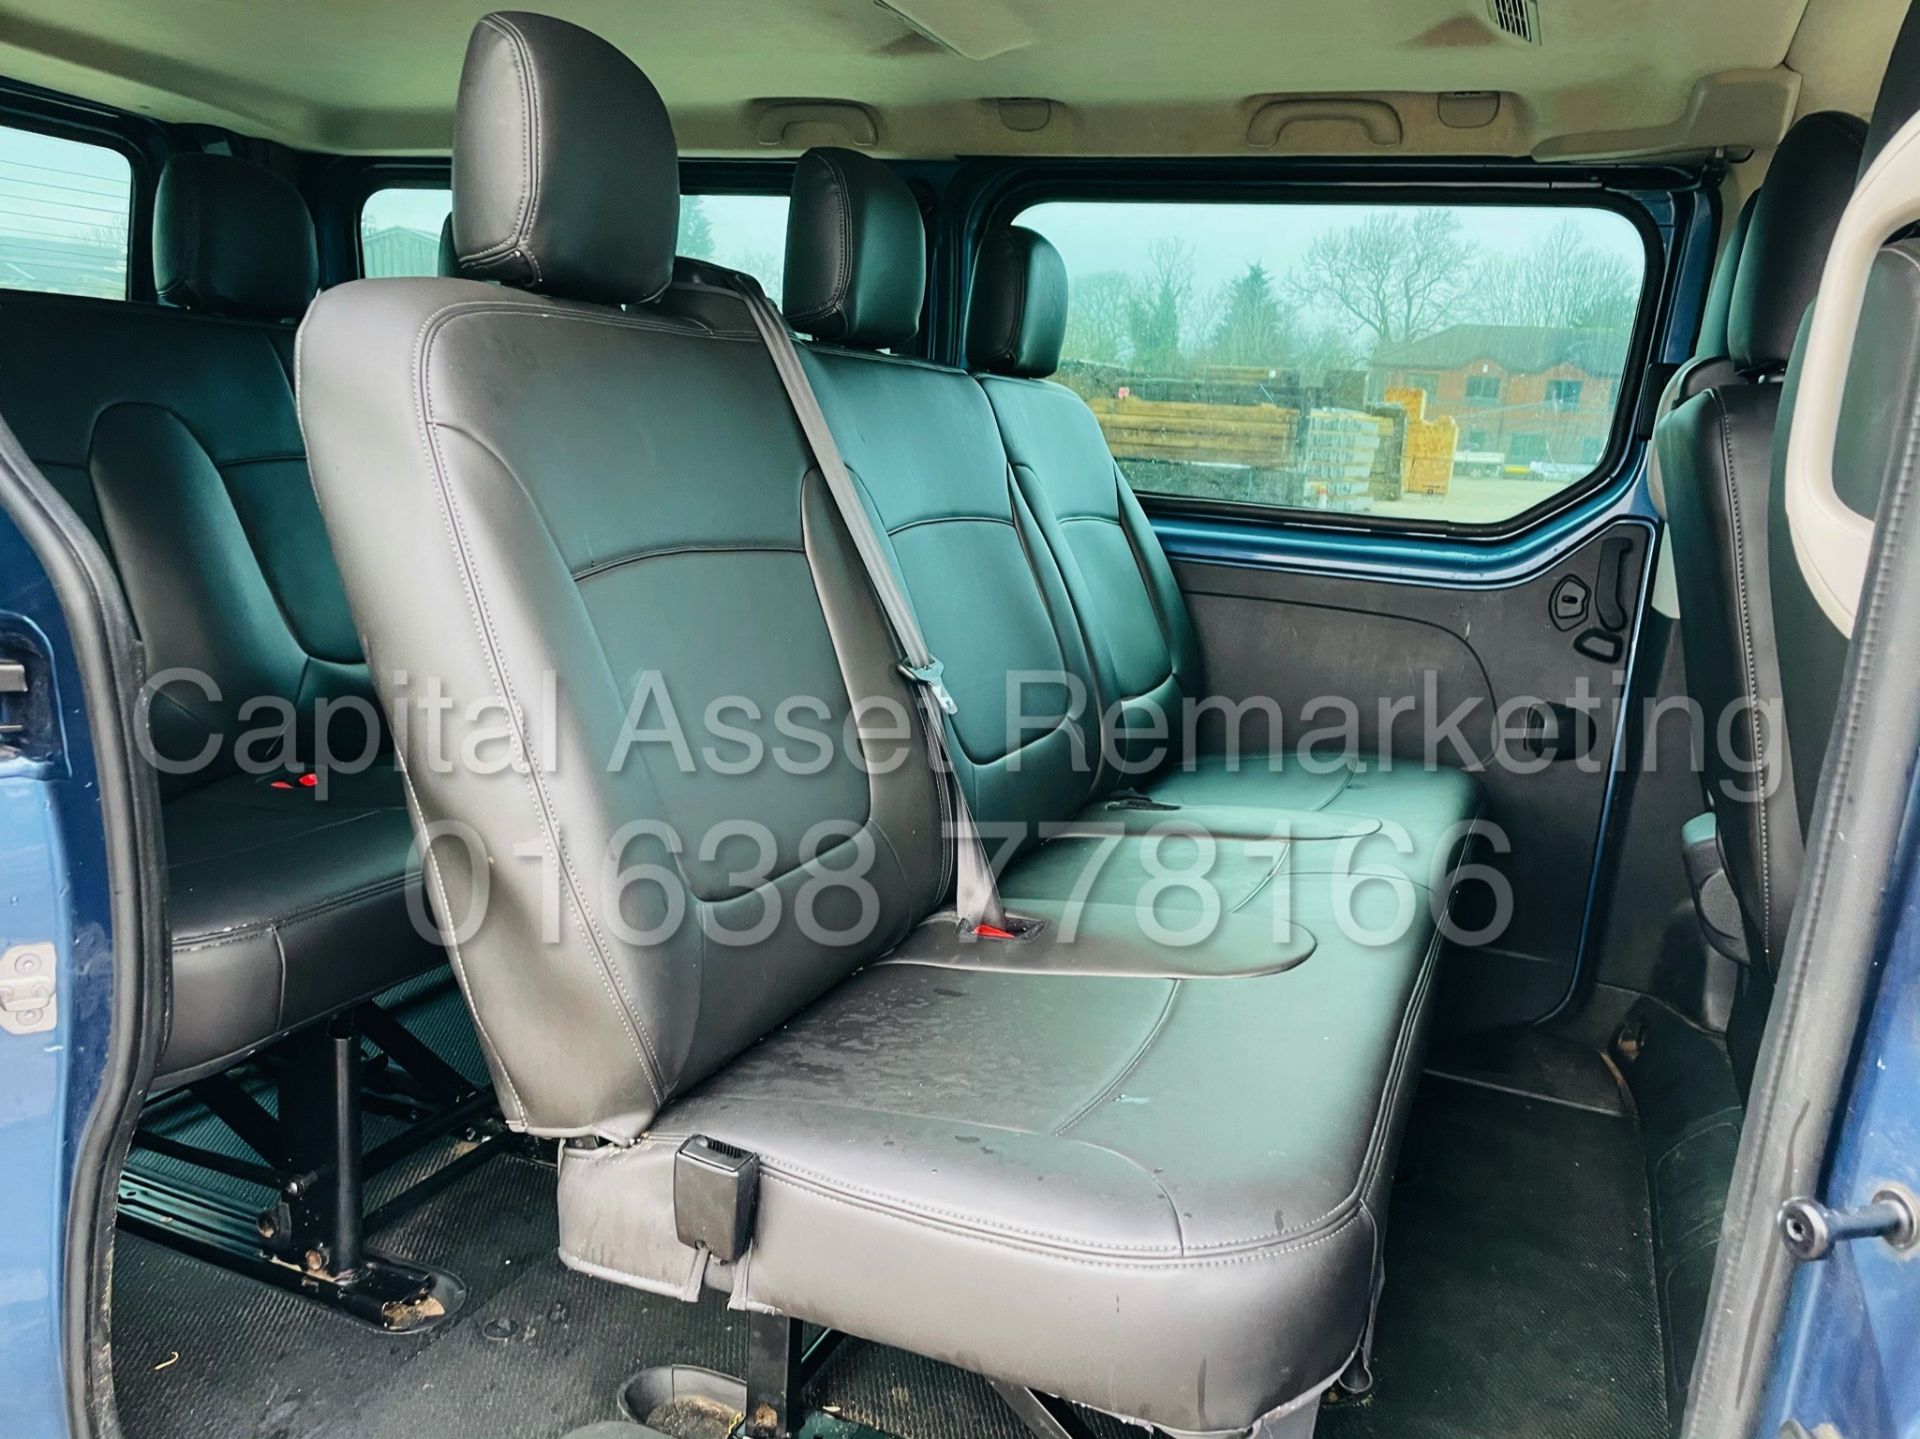 RENAULT TRAFIC *LWB - 9 SEATER MPV / BUS* (2017 - EURO 6) '1.6 DCI - 6 SPEED' *AIR CON* (NO VAT) - Image 29 of 47